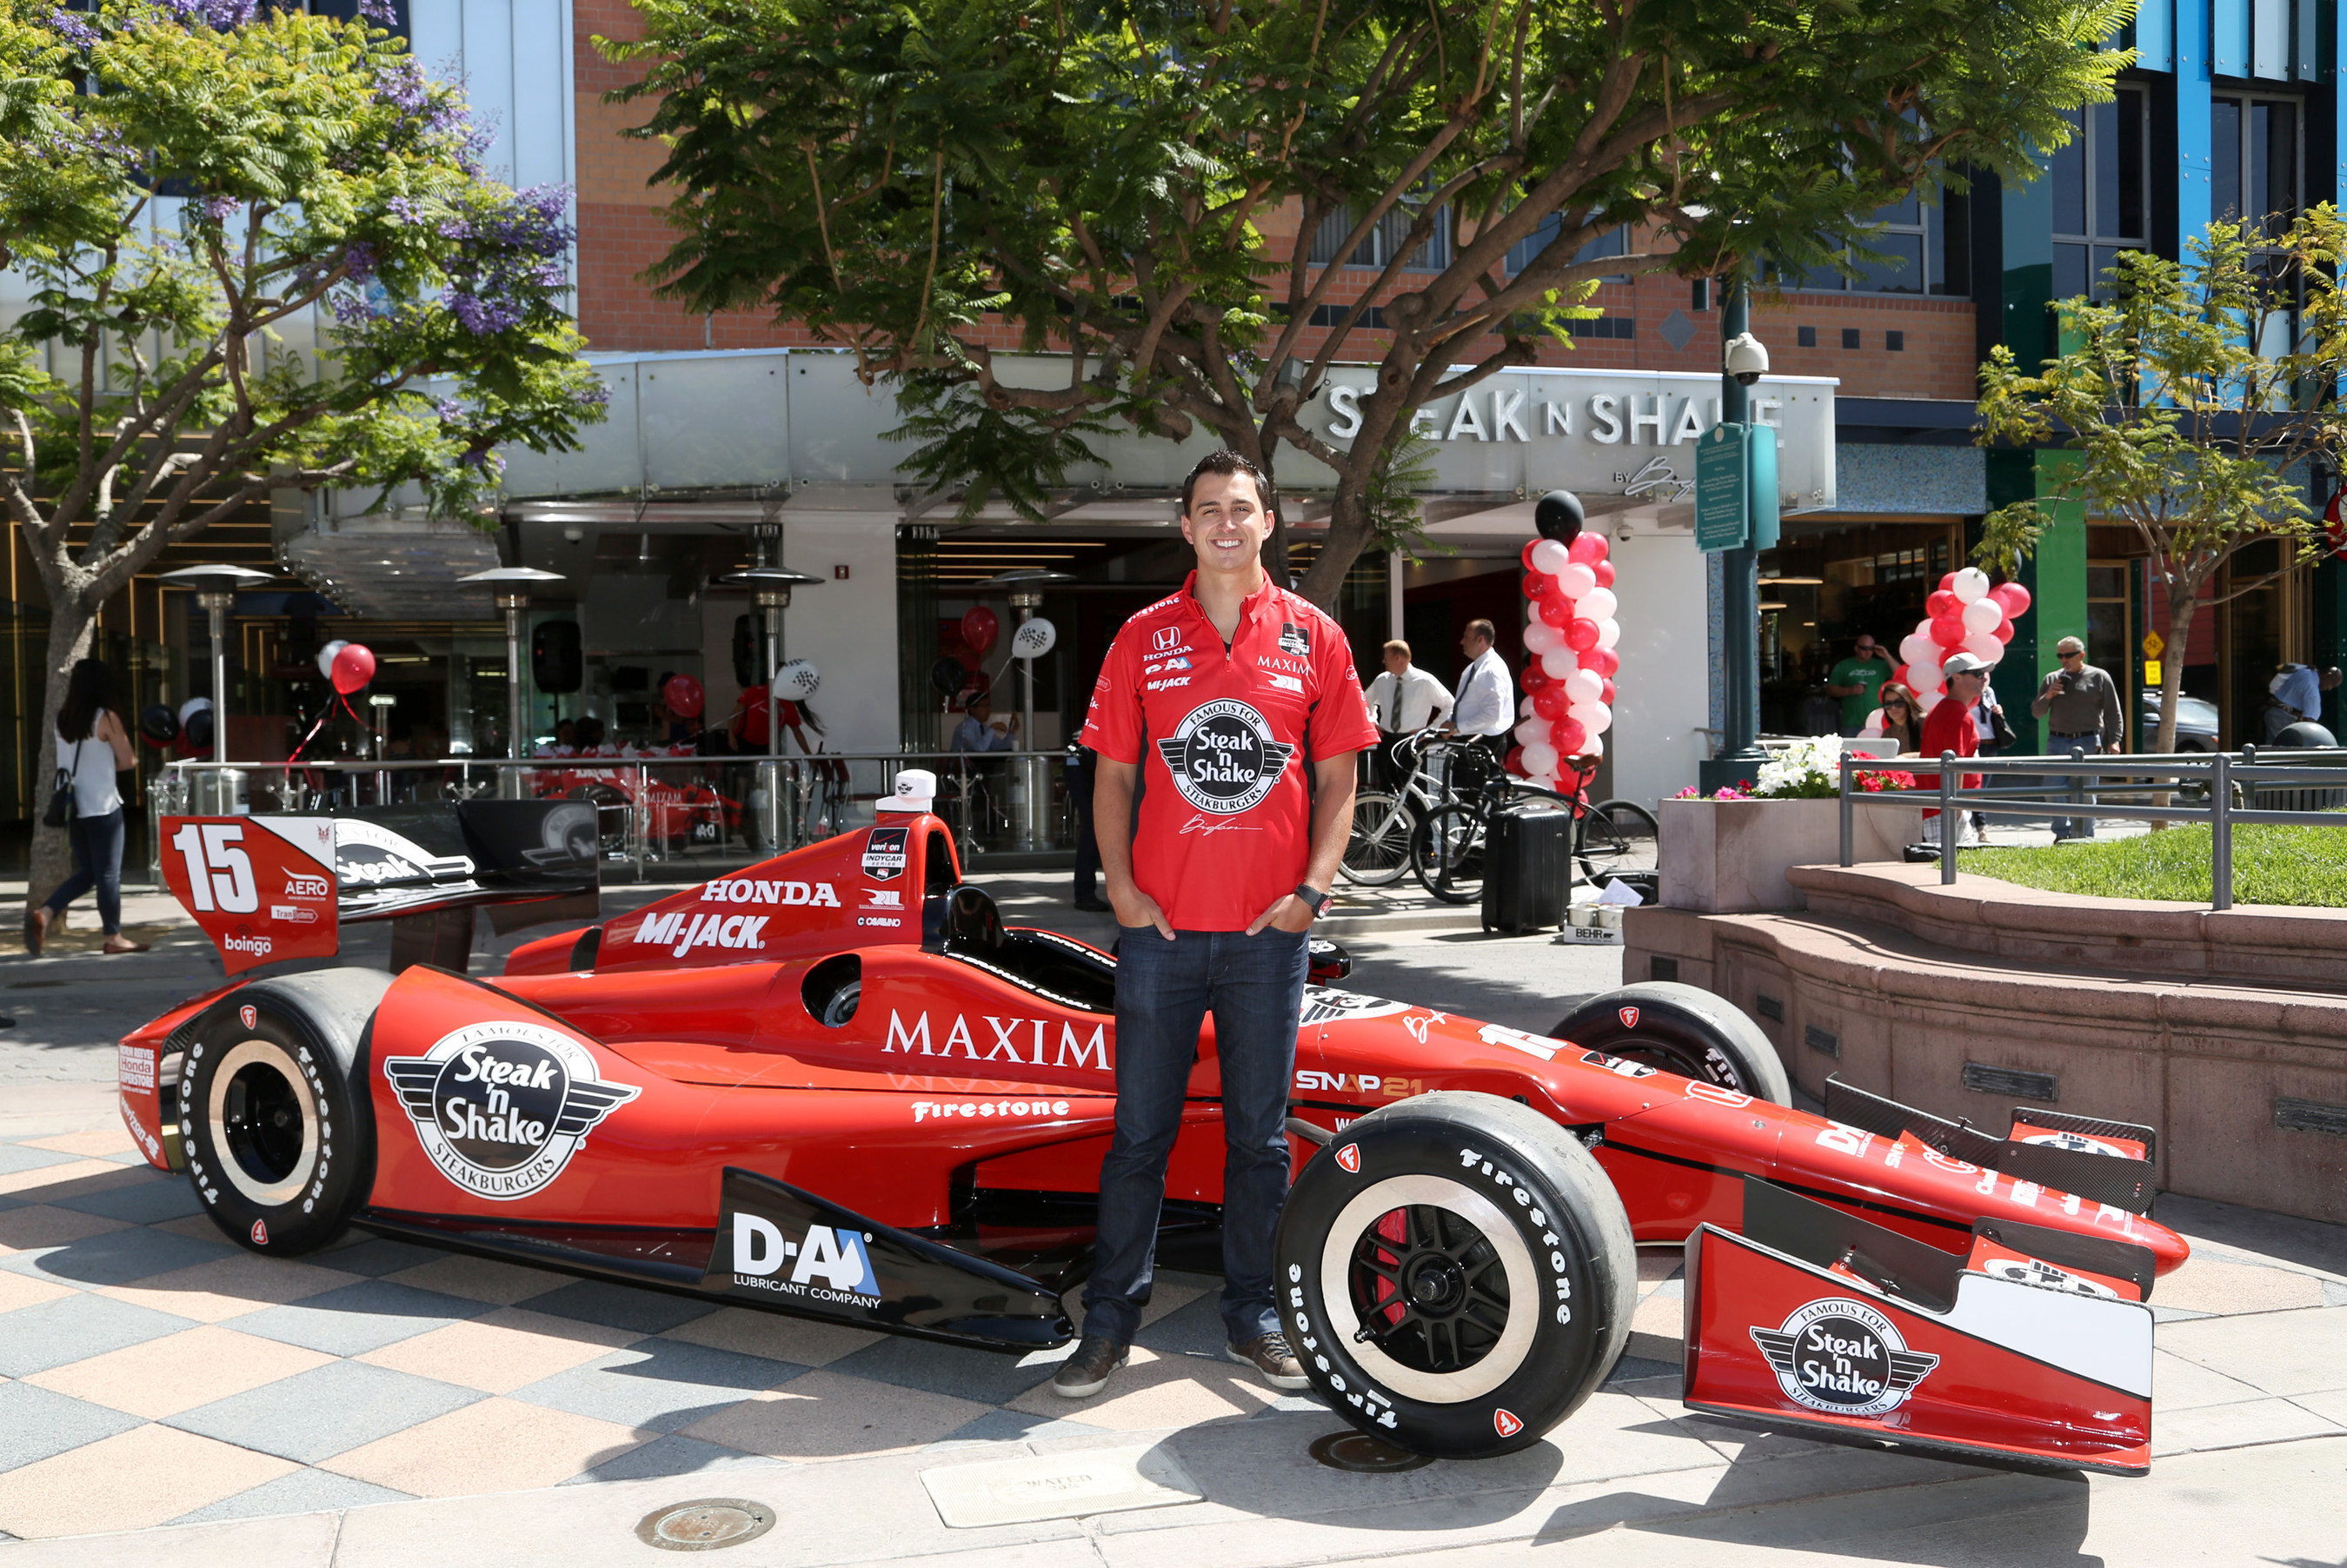 Steak 'n Shake and Rahal Letterman Lanigan Racing today debuted the new No. 15 Steak 'n Shake Indy car at the Third Street Promenade on Wednesday, April 15, 2015, in Santa Monica, Calif. (Photo by Casey Rodgers/Invision for Steak 'n Shake/AP Images)